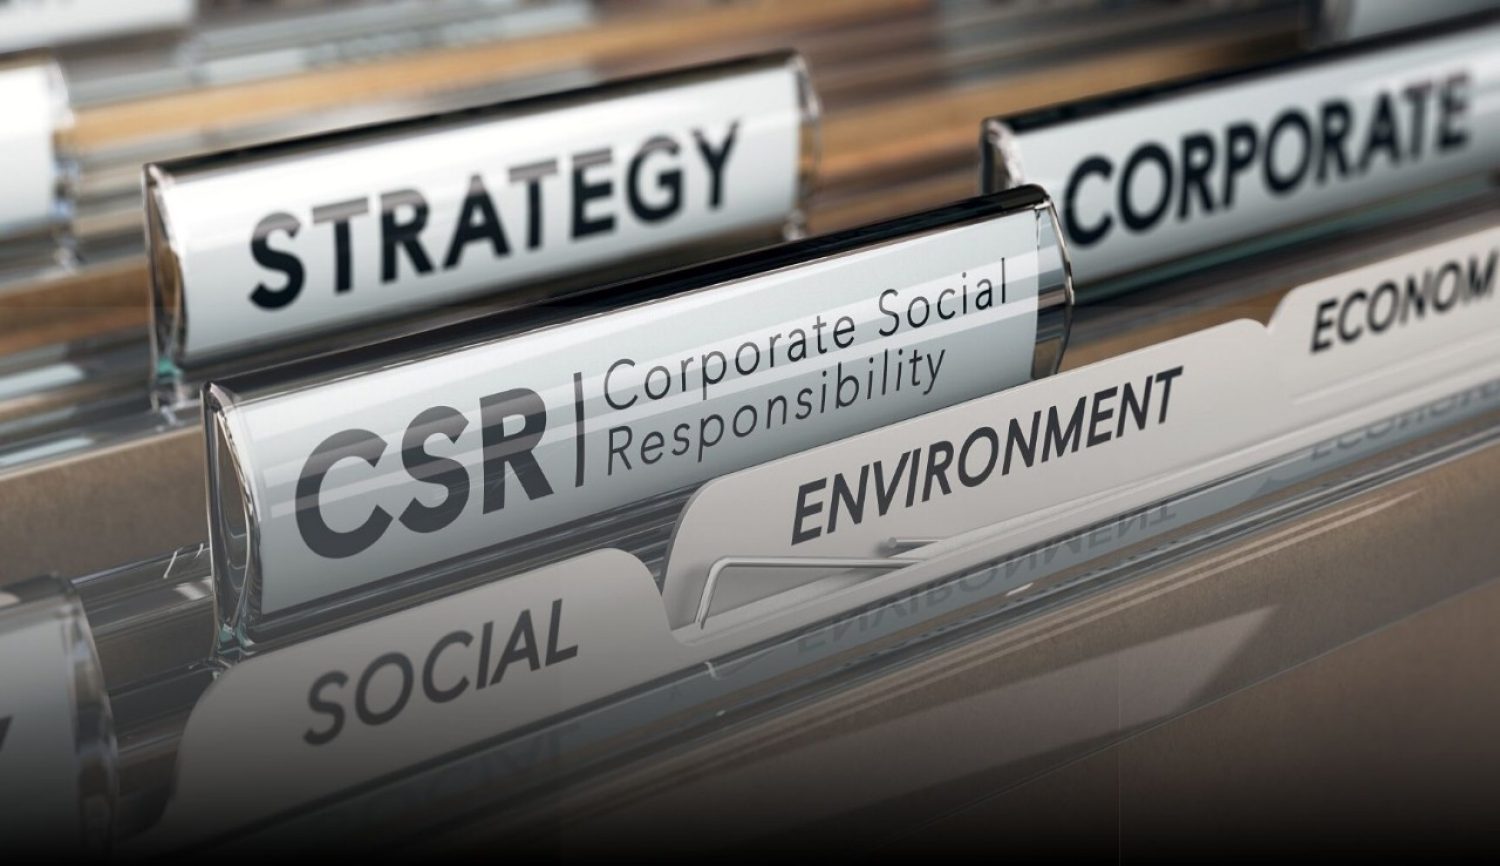 image of file folders with the titles "strategy", "CSR|Corporate Social Responsibility", "Social", "Environment", and "Corporate"